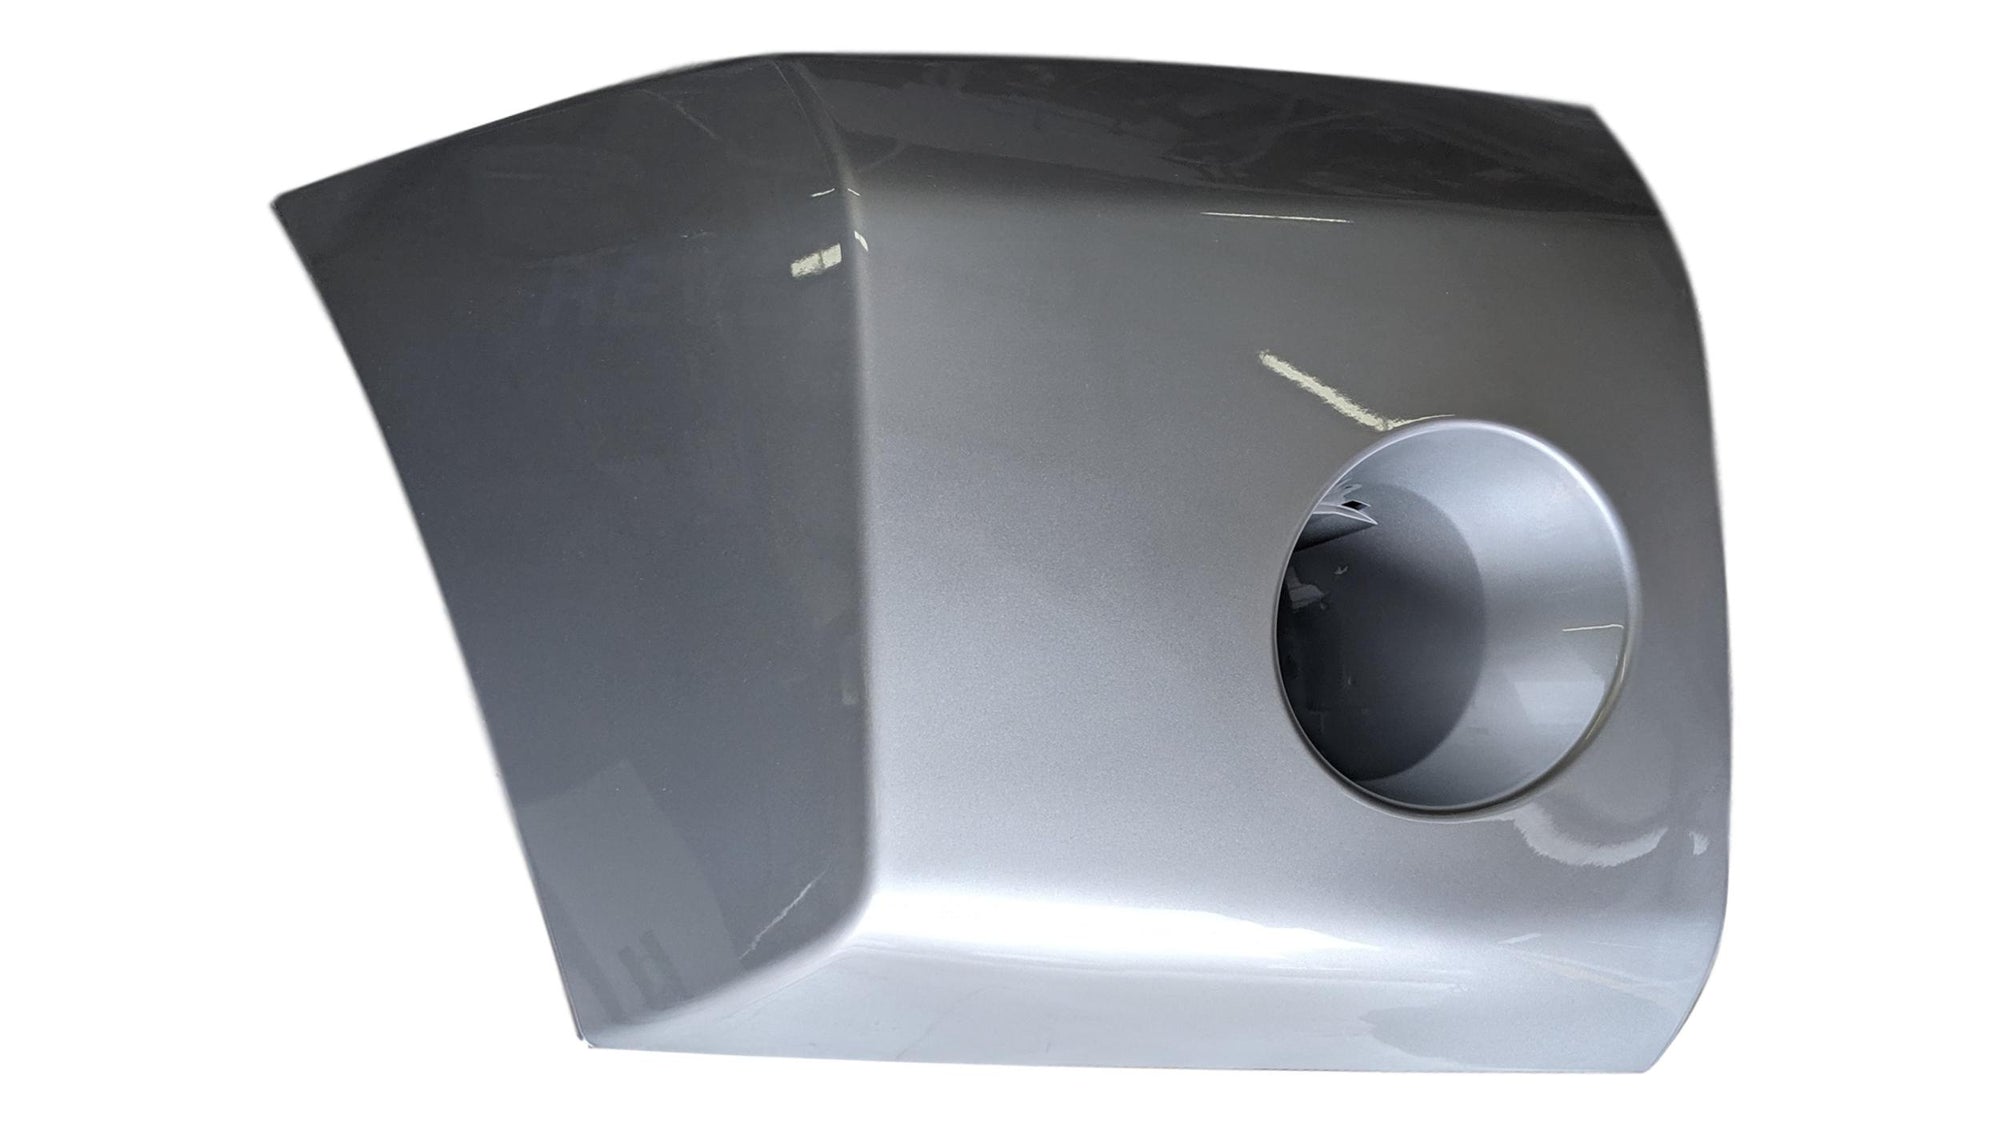 2004-2007 Nissan Armada Front End Cap Painted Radiant Silver Metallic/Silver Mist Metallic (K12) 620247S220 NI1005147 (Right, Passenger-Side)